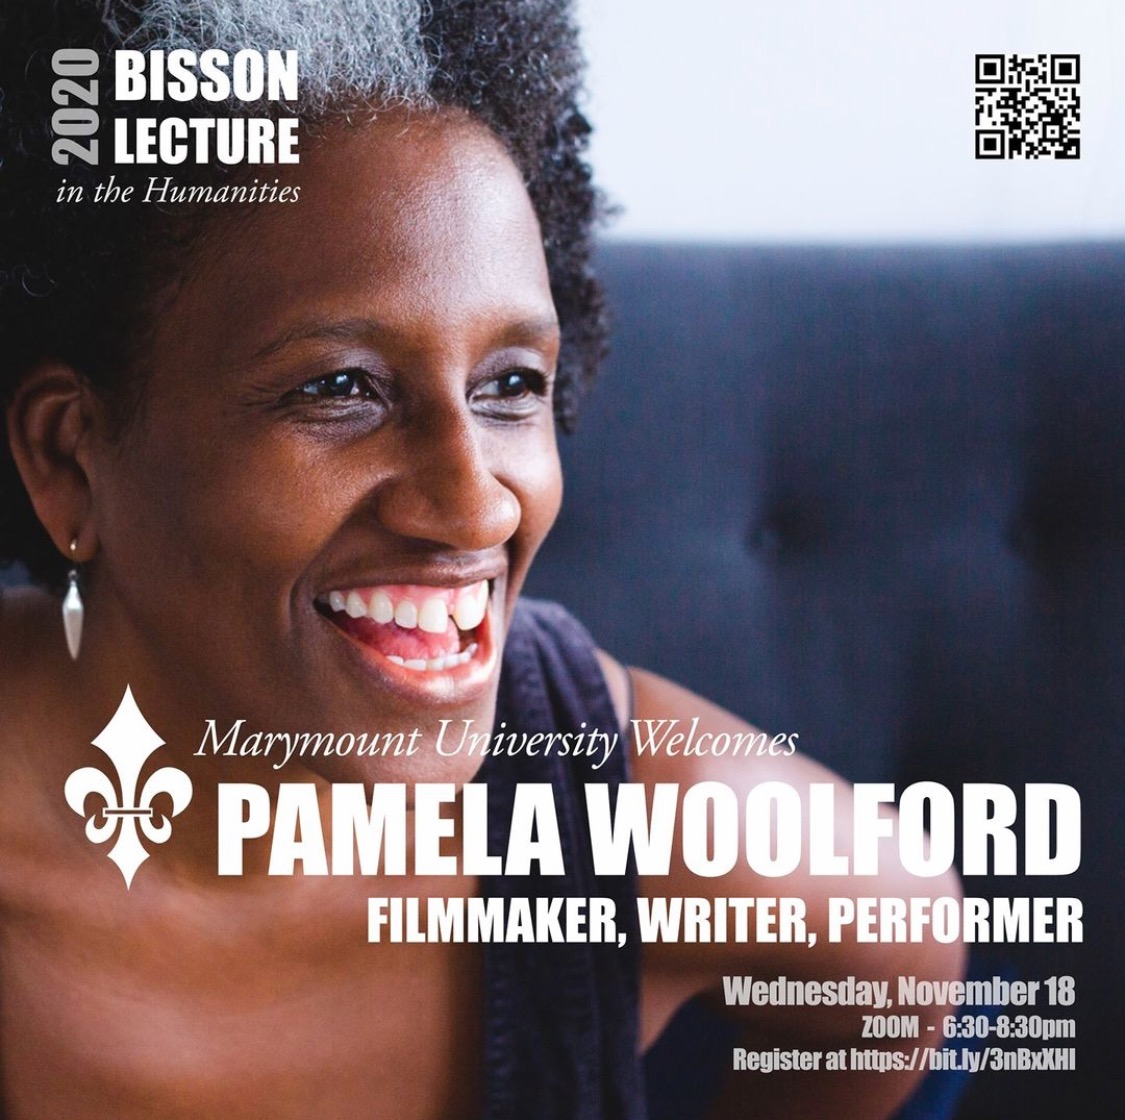 A headshot of Pamela Woolford with the words "2020 Bisson Lecture in the Humanities, Marymount University Welcomes PAMELA WOOLFORD, FILMMAKER, WRITER, PERFORMER " superimposed over the photo